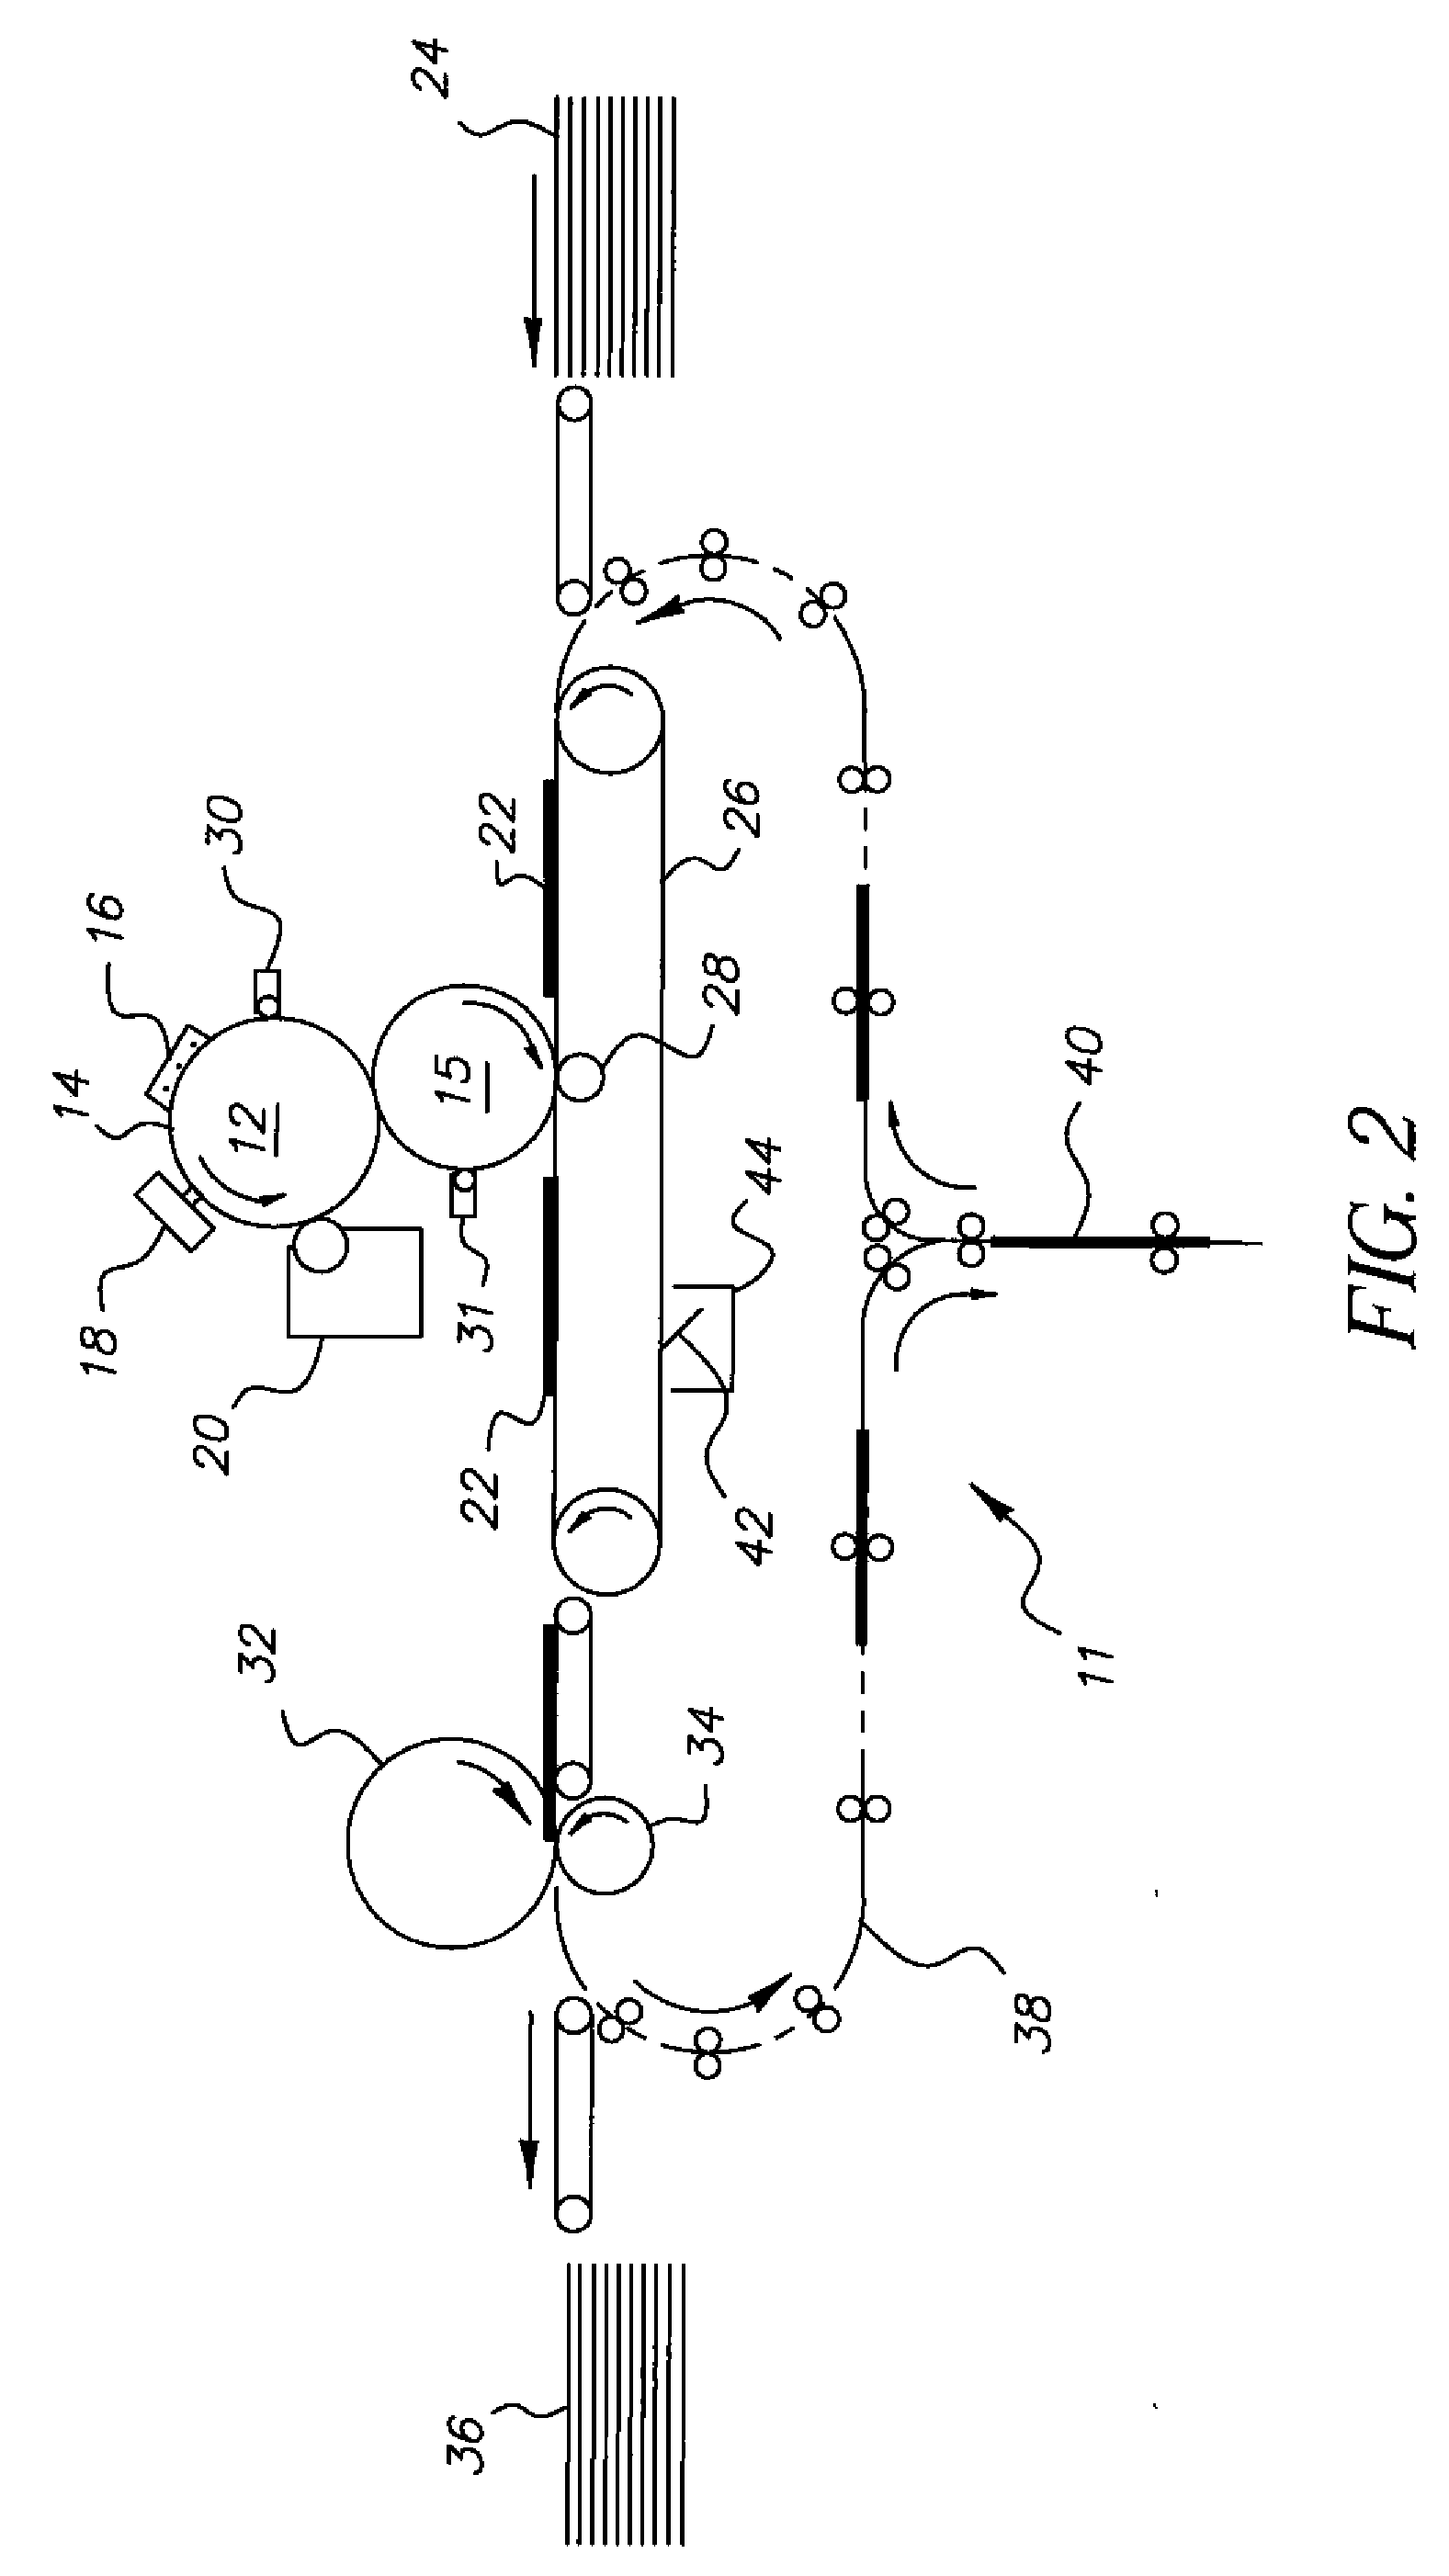 Printed electronic circuit boards and other articles having patterned coonductive images